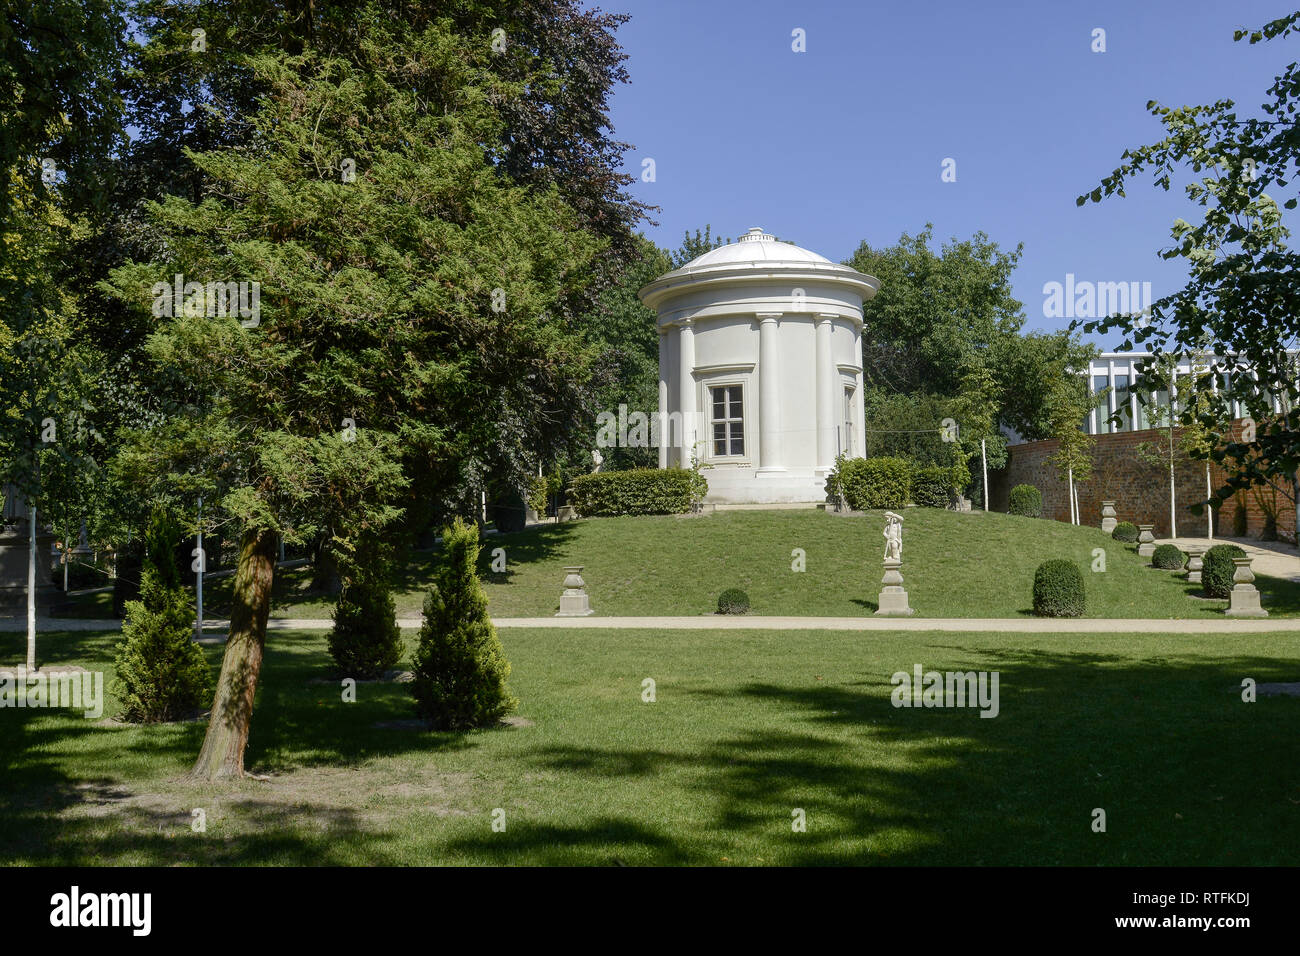 Temple Garden with Temple of the Muses, Tempelgarten, Neuruppin, Brandenburg, Germany, Europe Stock Photo